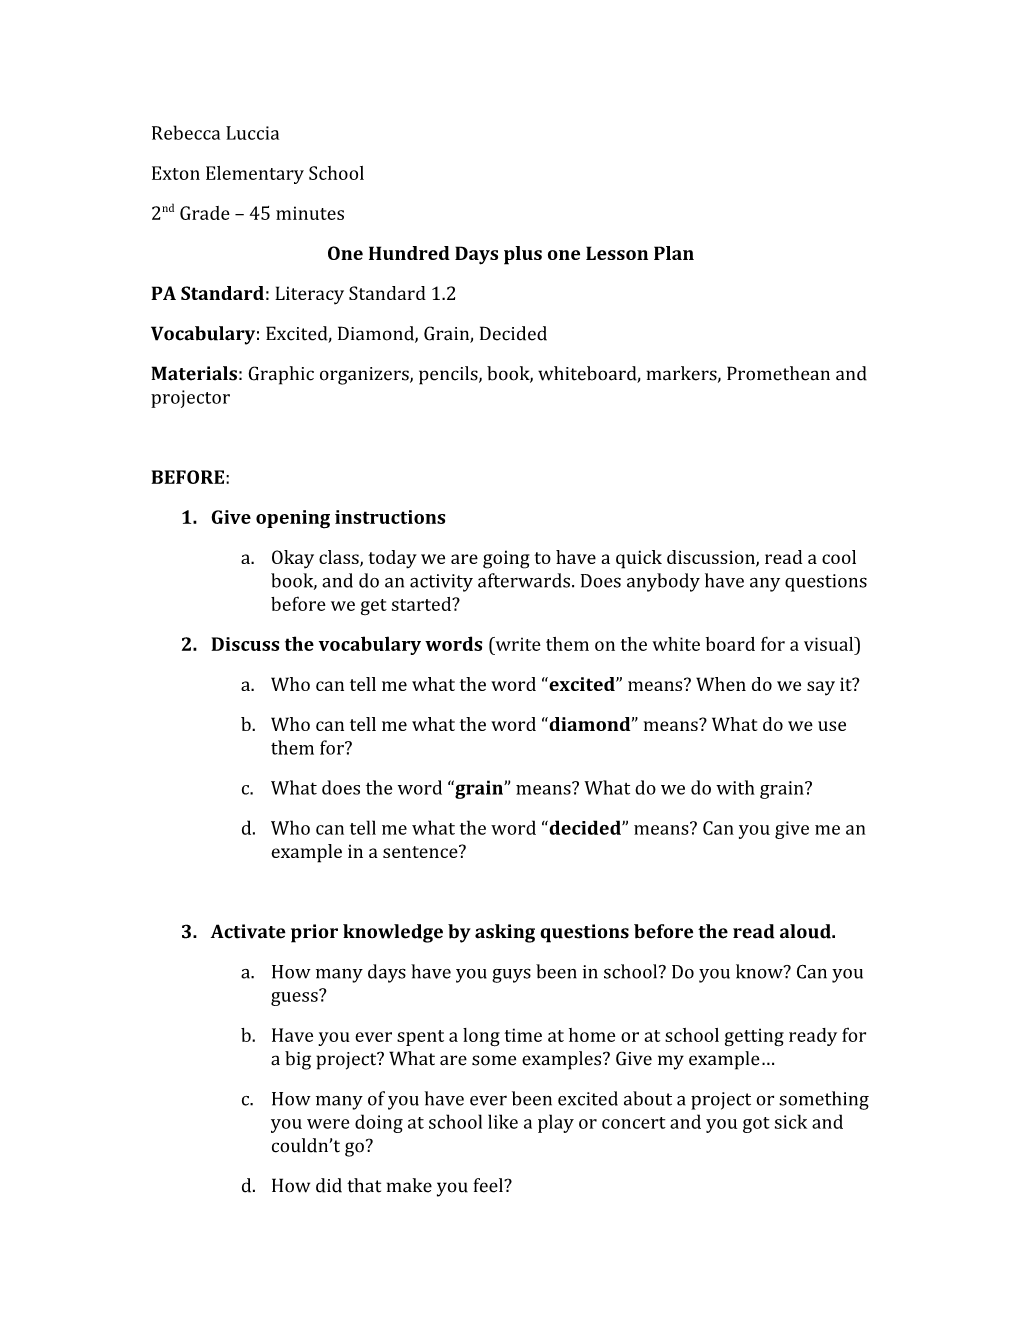 One Hundred Days Plus One Lesson Plan